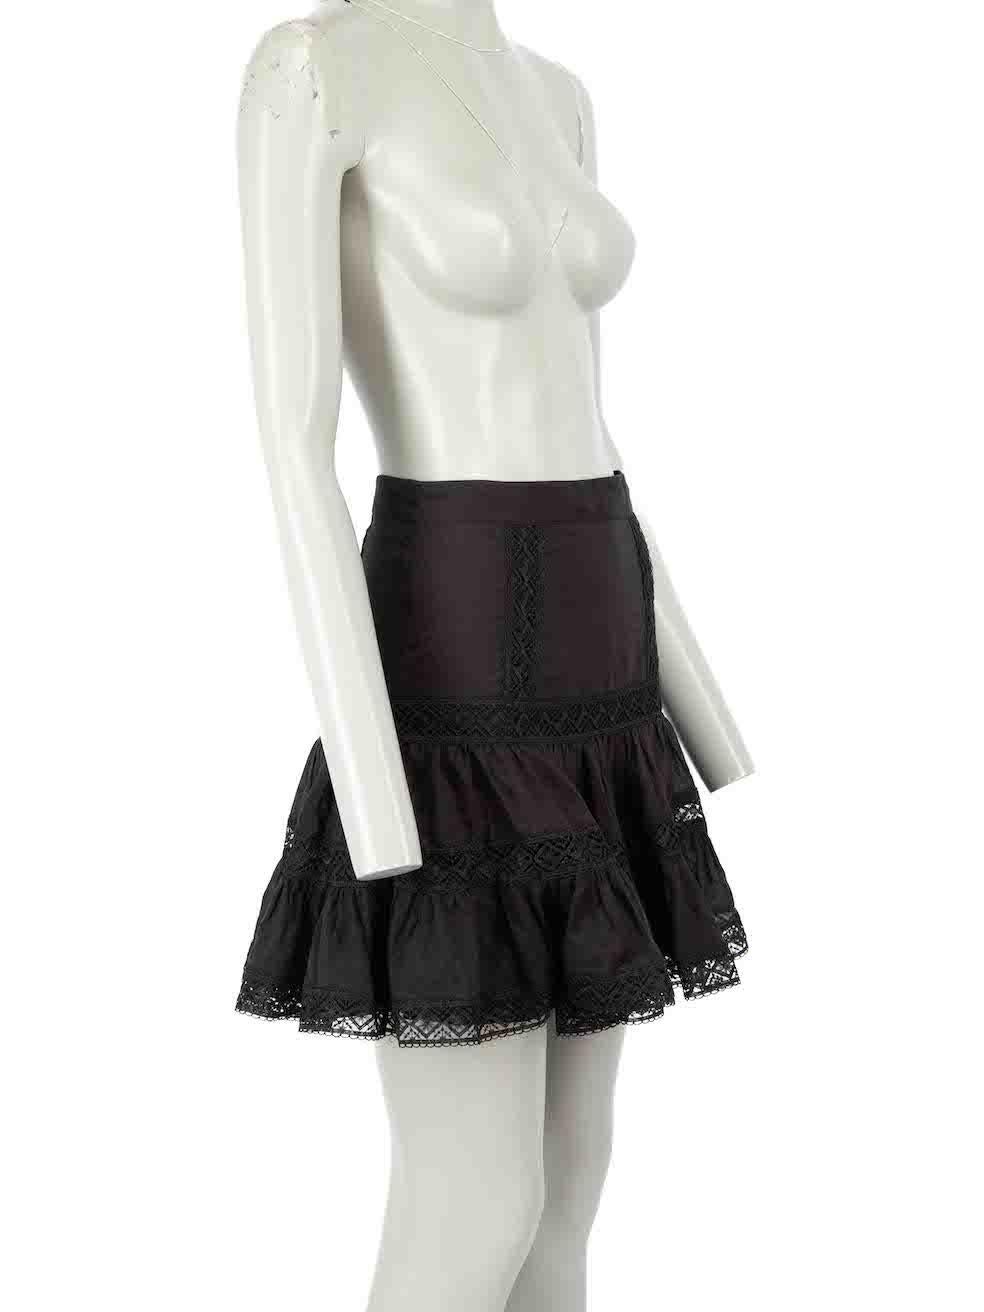 CONDITION is Never worn, with tags. No visible wear to skirt is evident on this new Charo Ruiz designer resale item.
 
 Details
 Black
 Cotton
 Skirt
 Mini
 Lace trim
 Side zip and hook fastening
 
 
 Made in Portugal
 
 Composition
 90% Cotton, 10%